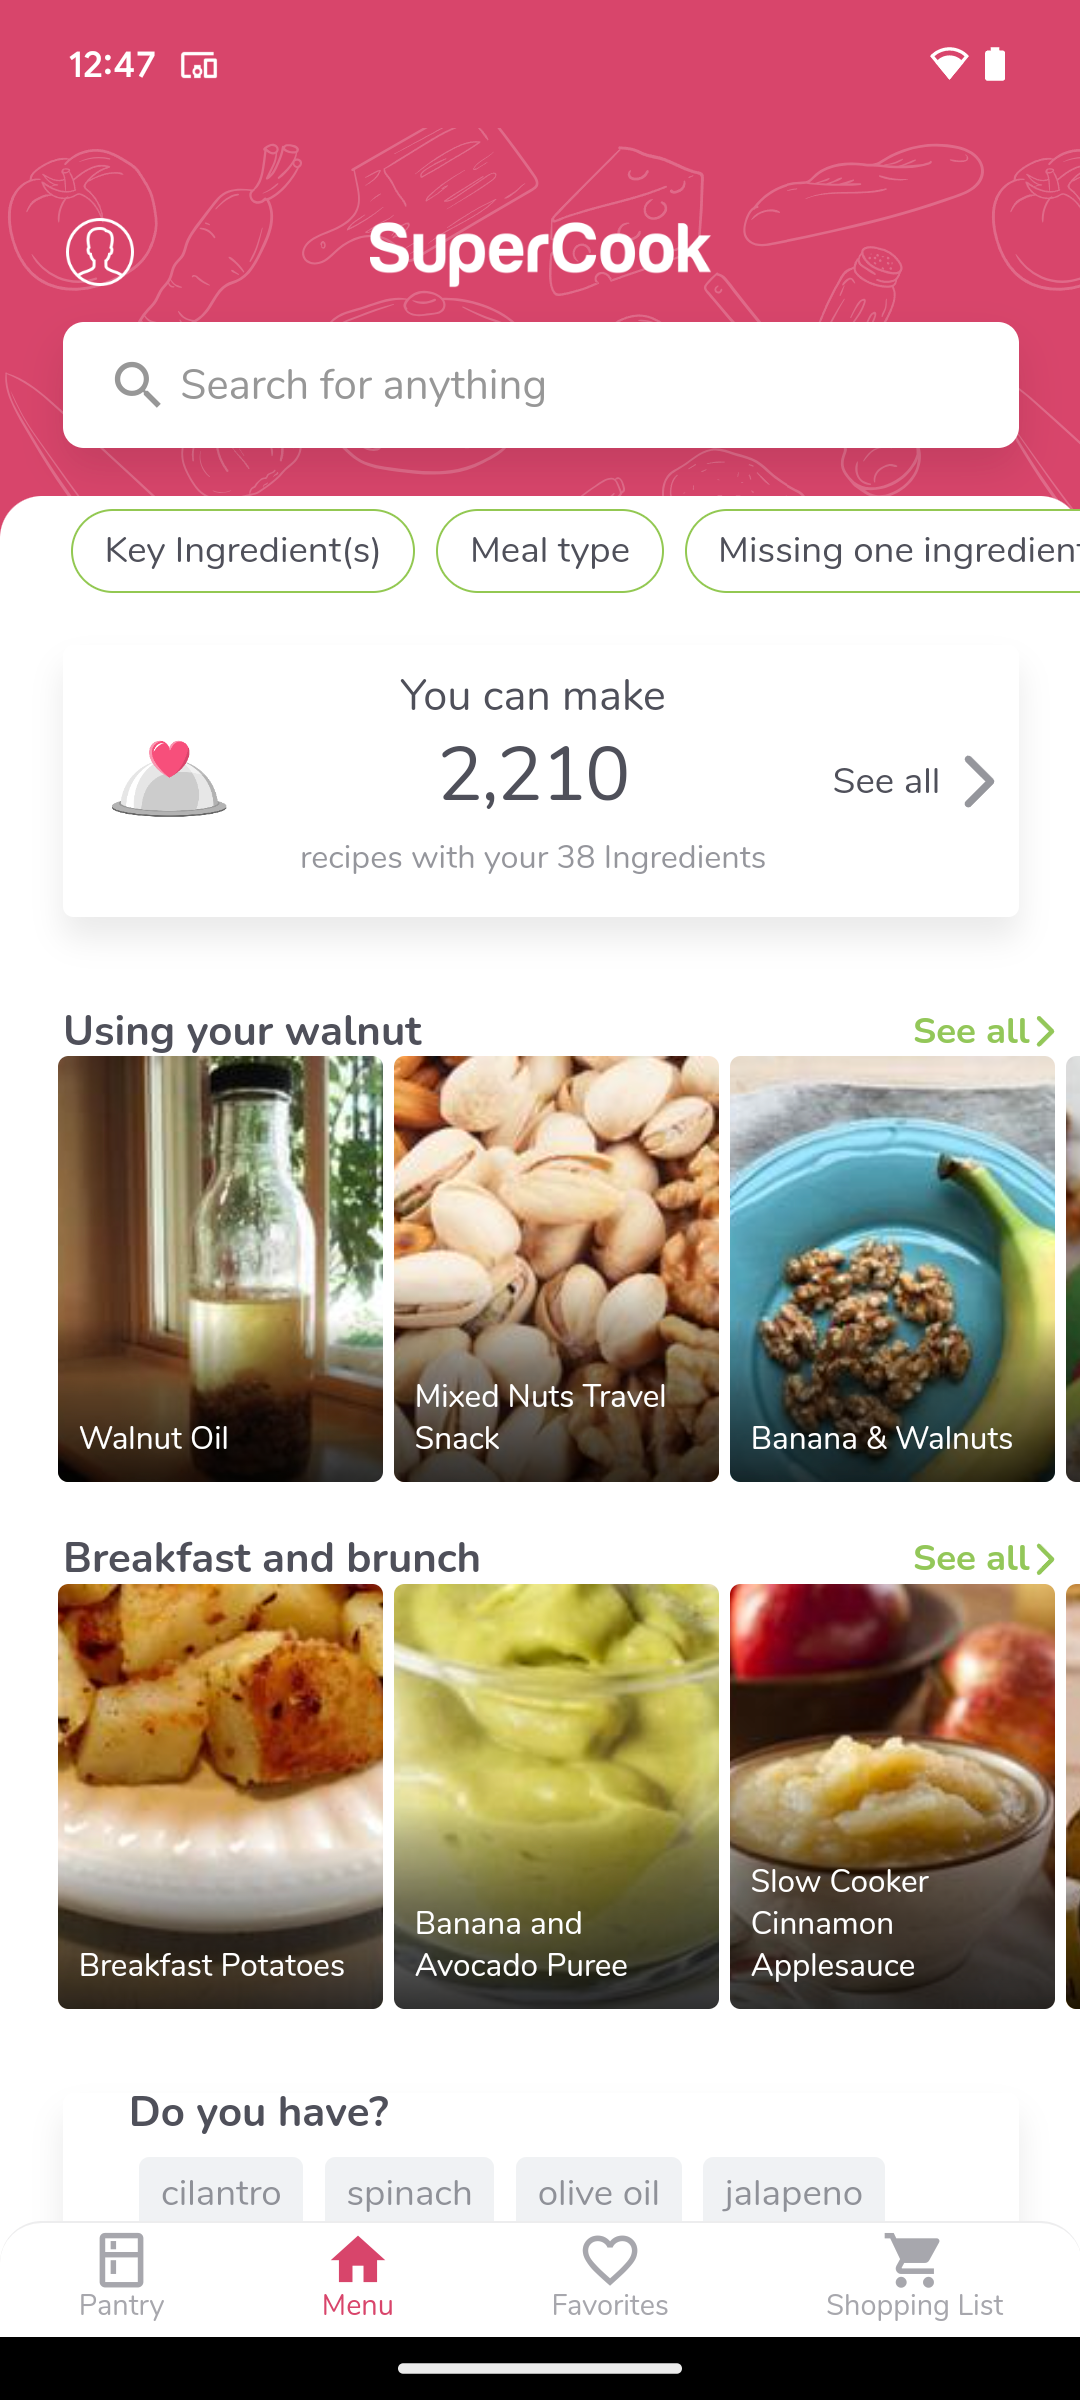 SuperCook app displaying recommended recipes